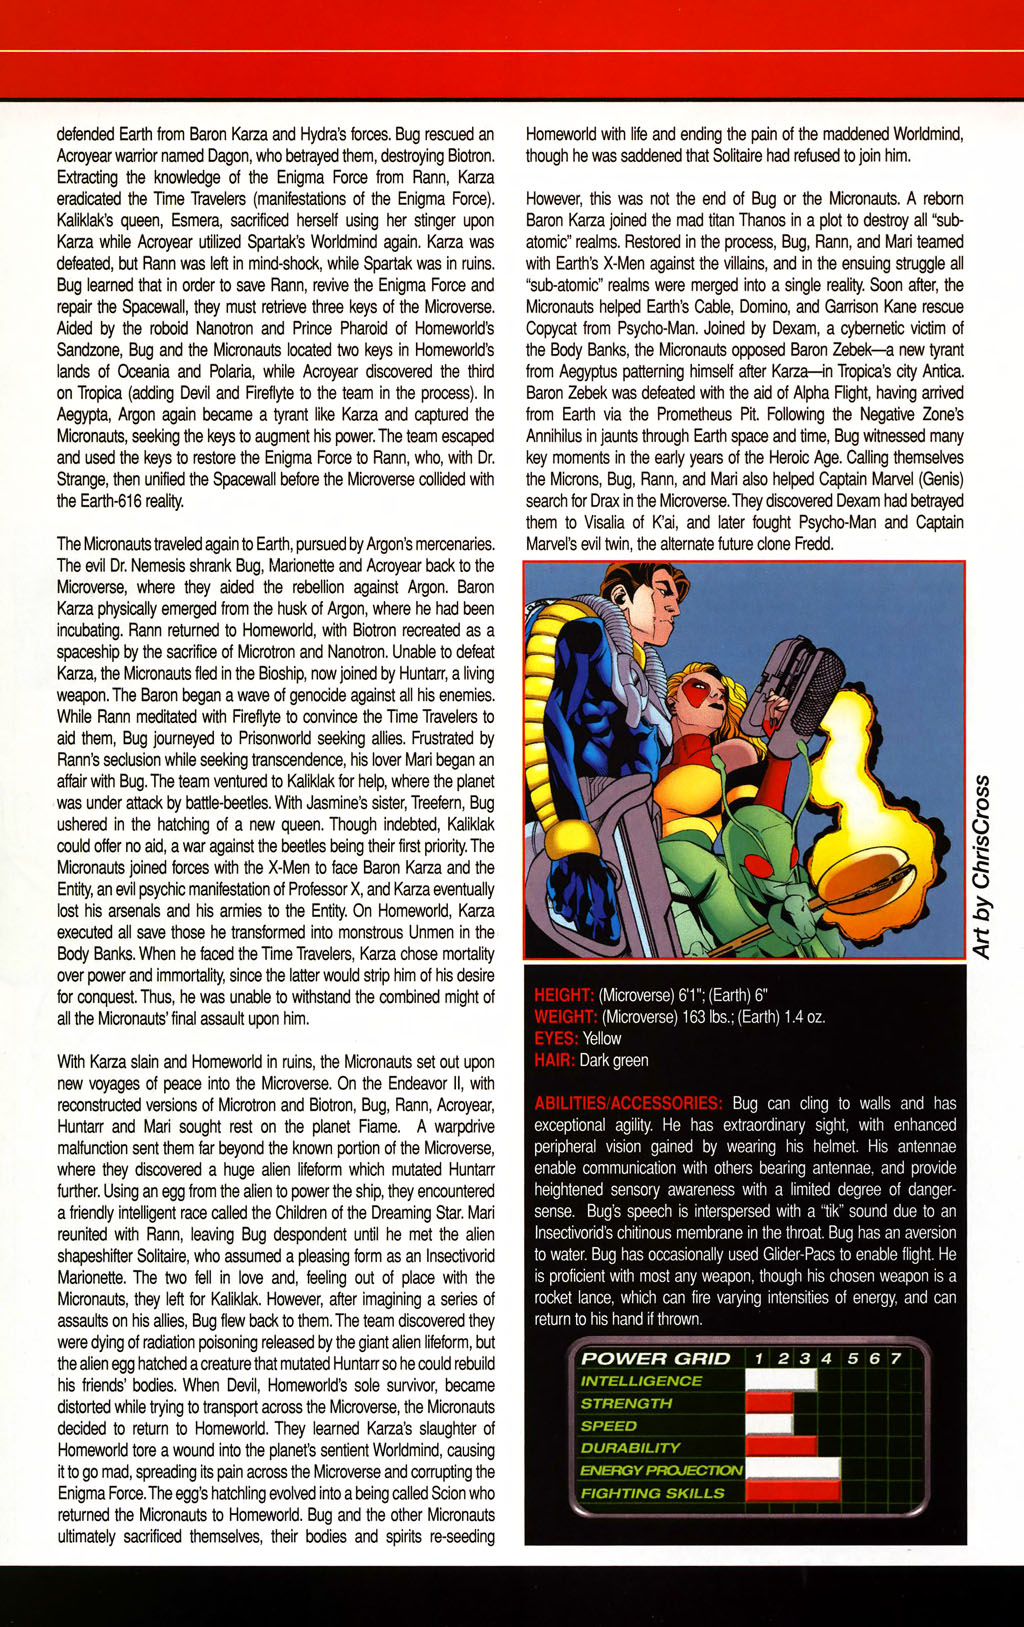 Marvel Universe biography page 2 for Bug